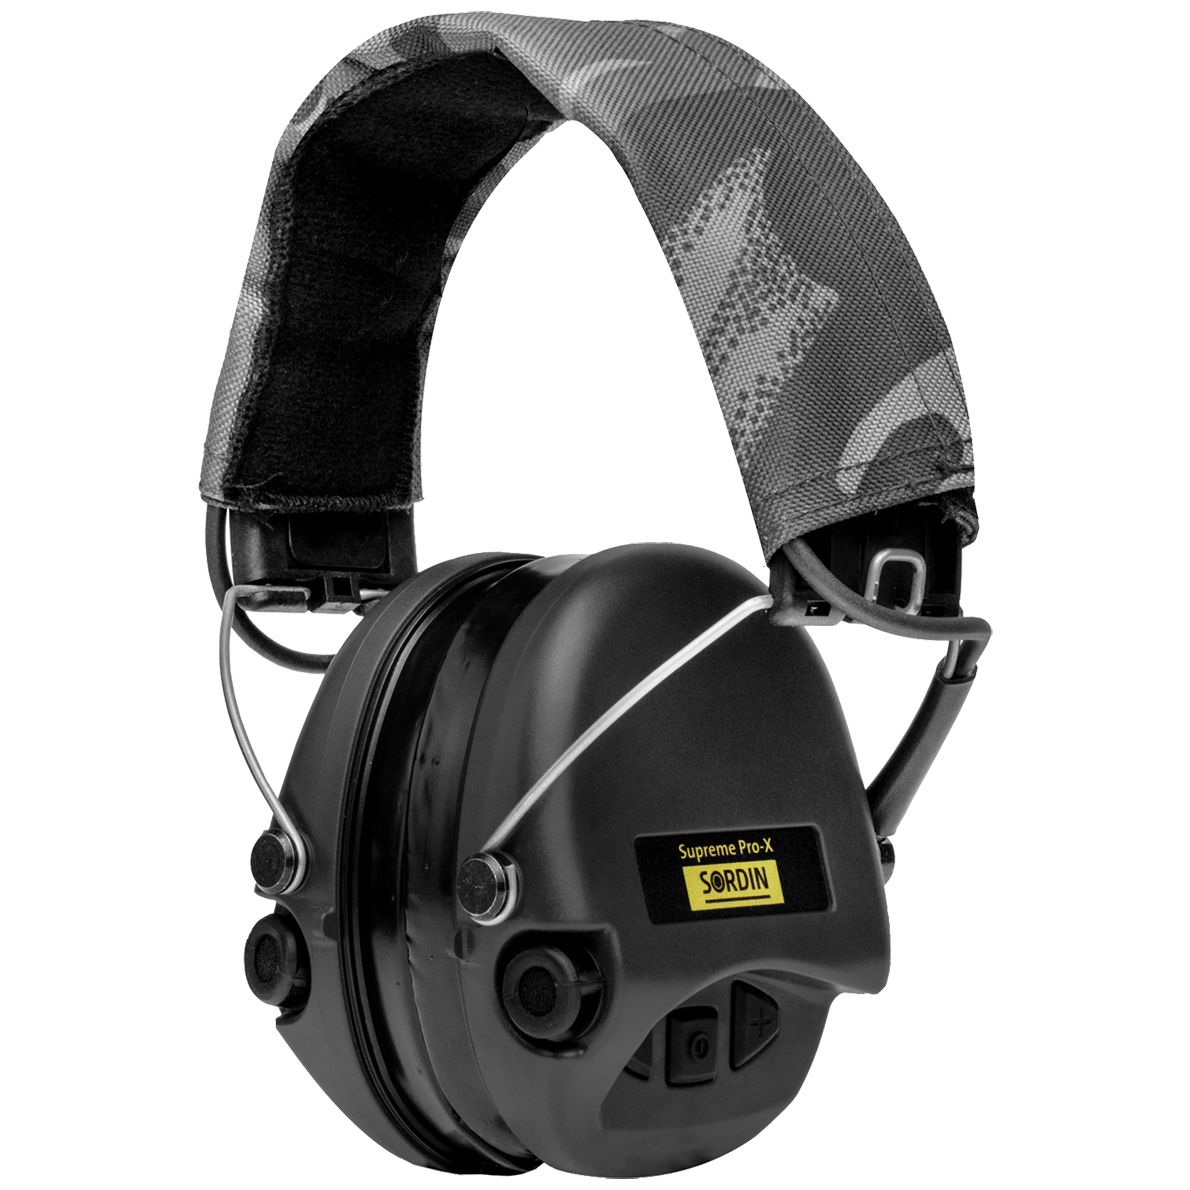 Sordin Supreme Pro-X (ACE) Active Capsule Hearing Protection - EN 352 - with Night Camo Fabric Strap, Gel Cushion & Black Capsules